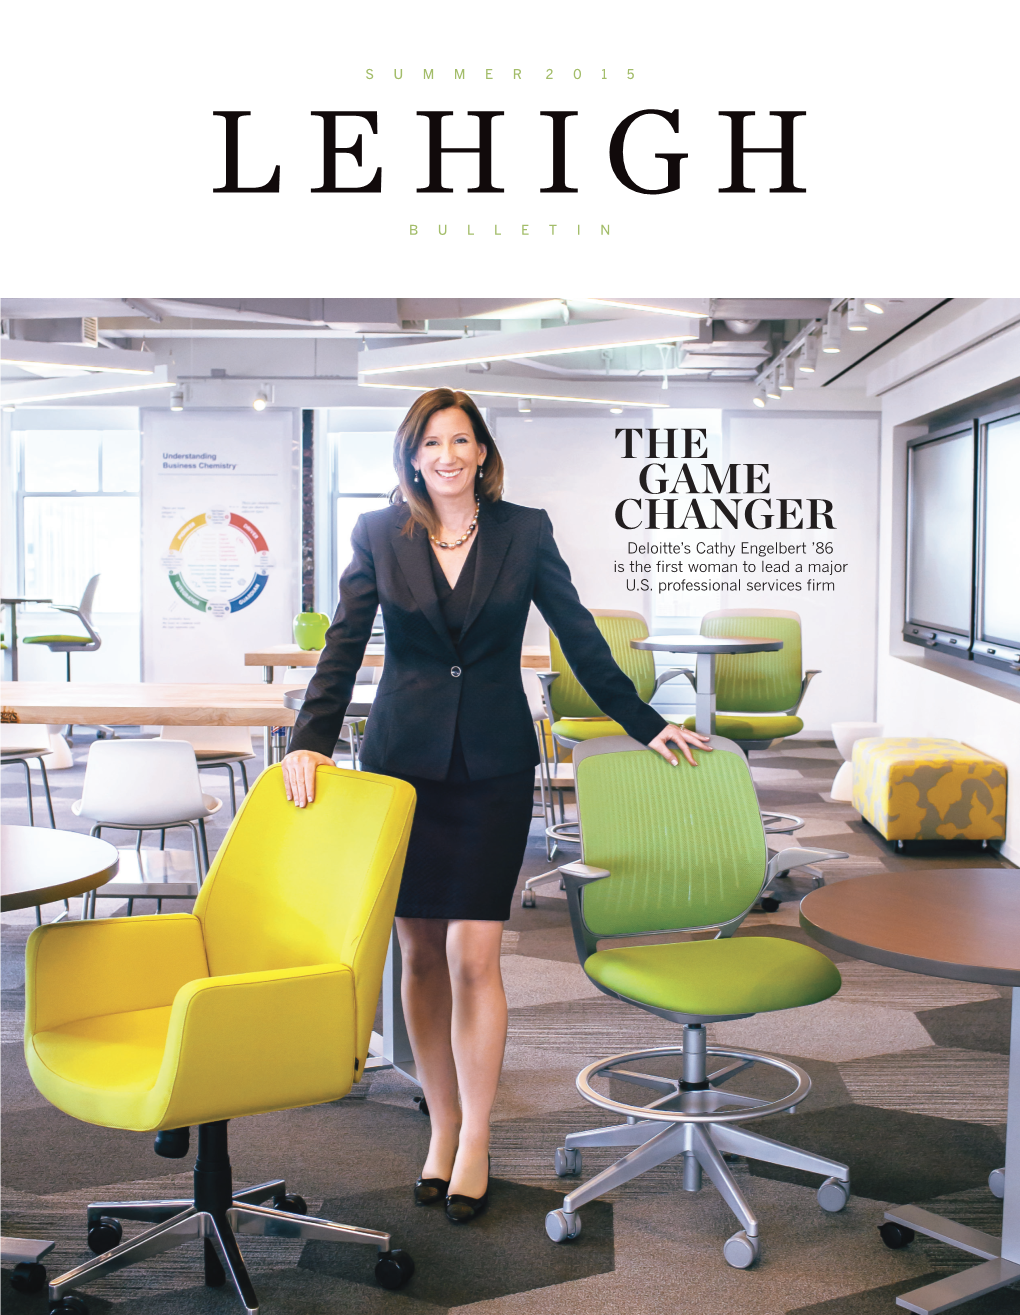 THE GAME CHANGER Deloitte’S Cathy Engelbert ’86 Is the First Woman to Lead a Major U.S